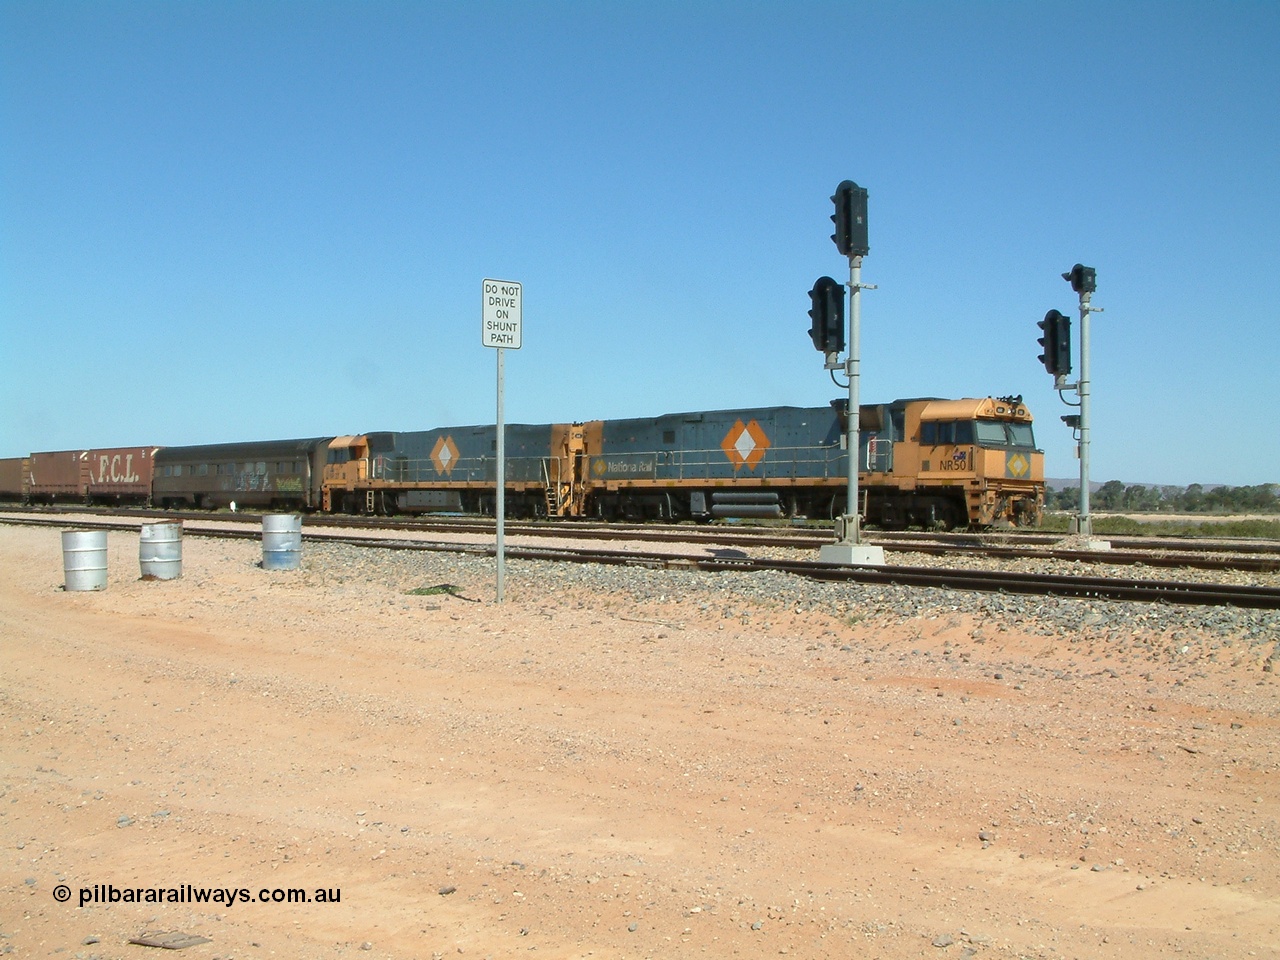 030404 125017
Port Augusta Spencer Junction yard, a Perth bound intermodal awaits departure time on 13 Road behind National Rail NR class units built by Goninan as GE Cv40-9i models, NR 50 serial 7250-08 / 97-252 and NR 37 serial 7250-06 / 97-239. 4th April 2003.
Keywords: NR-class;NR50;7250-08/97-252;Goninan;GE;Cv40-9i;